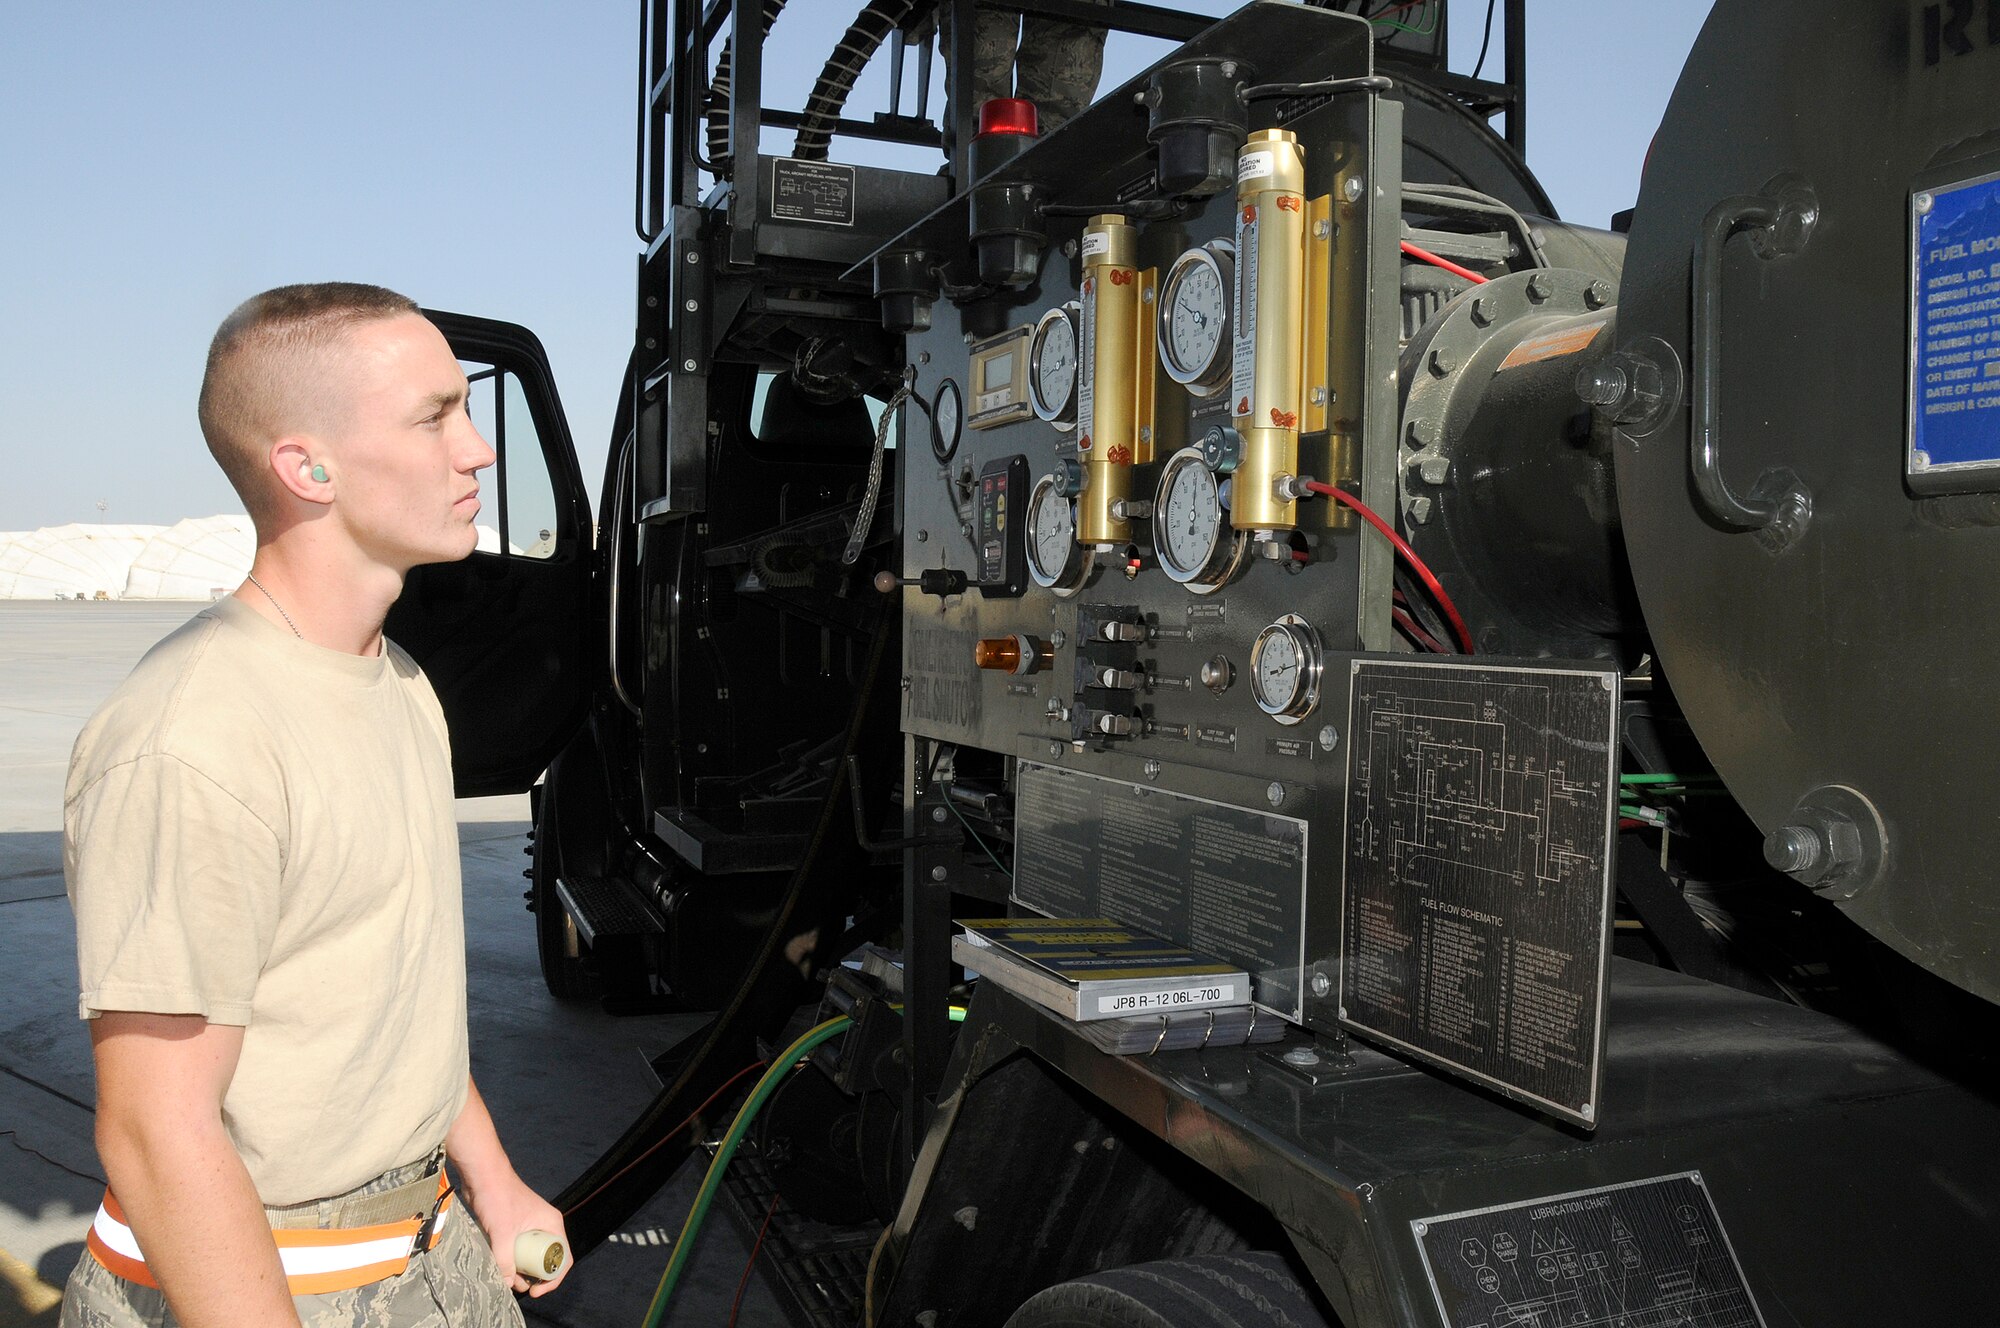 SOUTHWEST ASIA -- Airman 1st Class Stuart Brennan from the 380th Expeditionary Logistics Readiness Squadron checks his gauges while he uses a "dead man" to refuel a KC-10 Extender here. This is a device that the fuels Airmen use to ensure there is a constant flow maintained during refueling. Airman Brennan has to grip the "dead man" and release it within 90 seconds continually throughout the refueling process. The average fuel transfer rate is 600 gallons per minute. Airman Brennan is deployed from the 20th LRS, Shaw Air Force Base, S.C., his hometown is Westerly, R.I. (U.S. Air Force photo/Tech. Sgt. Christopher A. Campbell) (released)